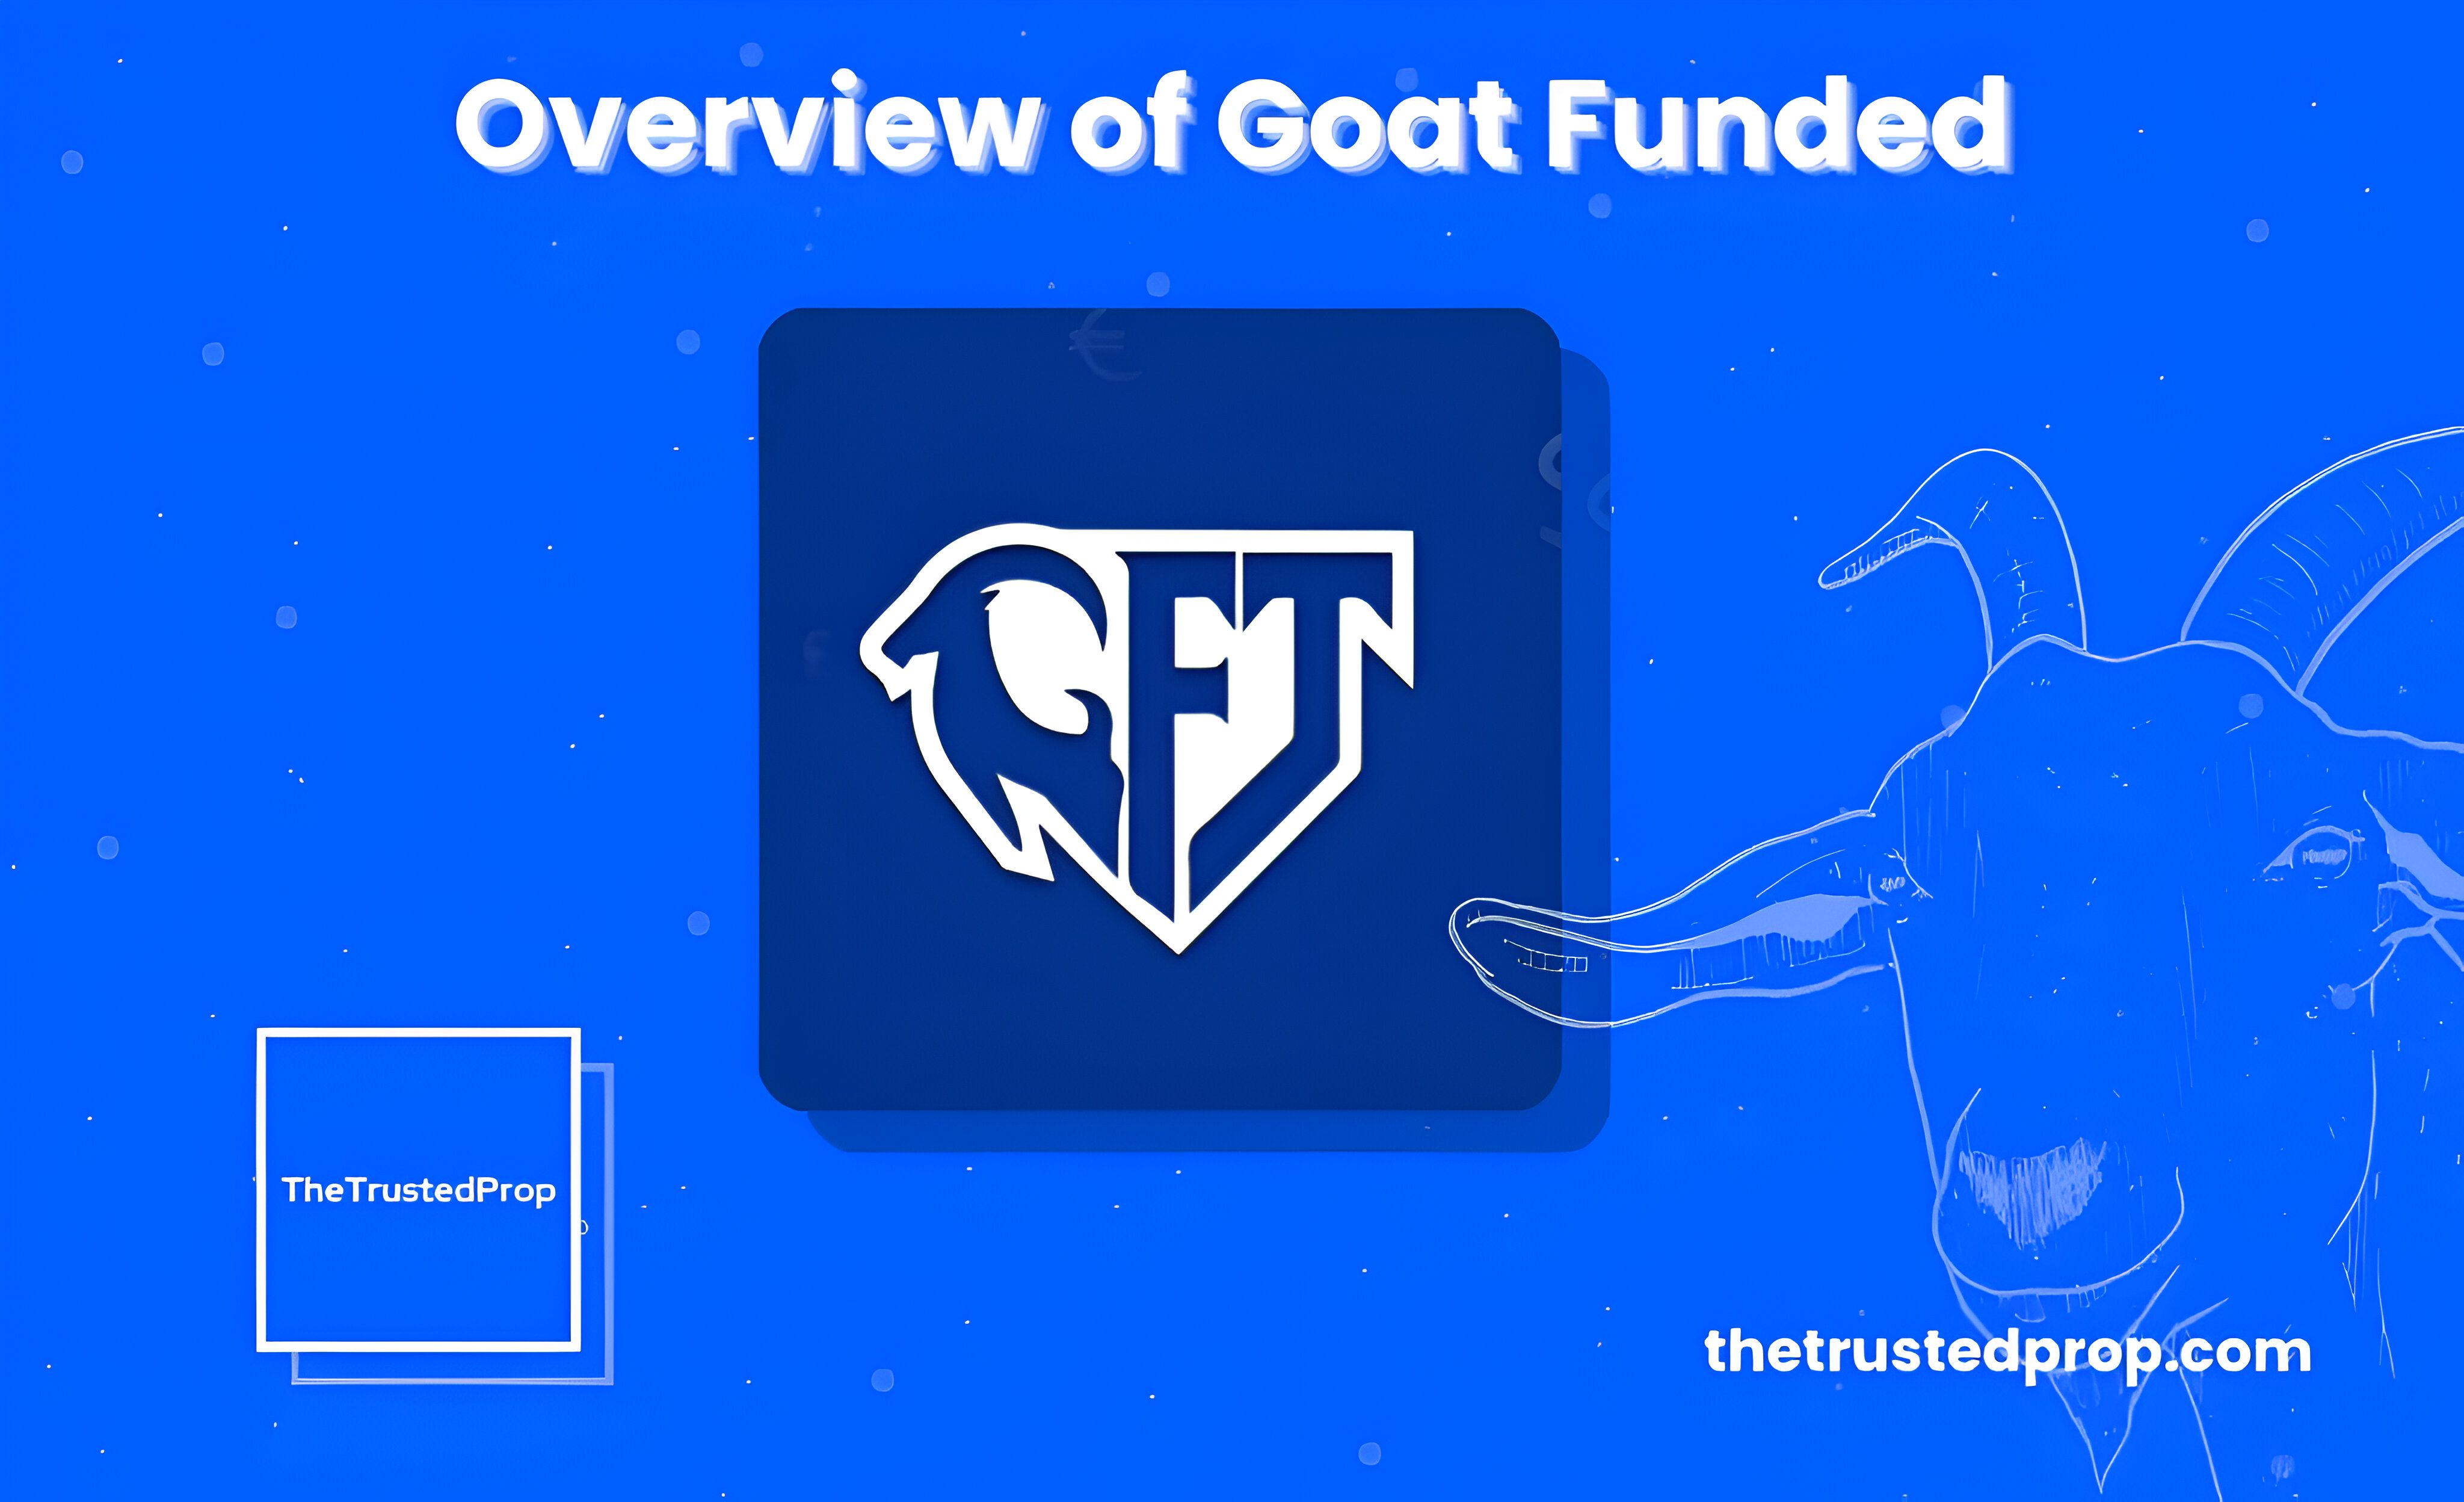 Overview of Goat-Funded-trader.jpeg